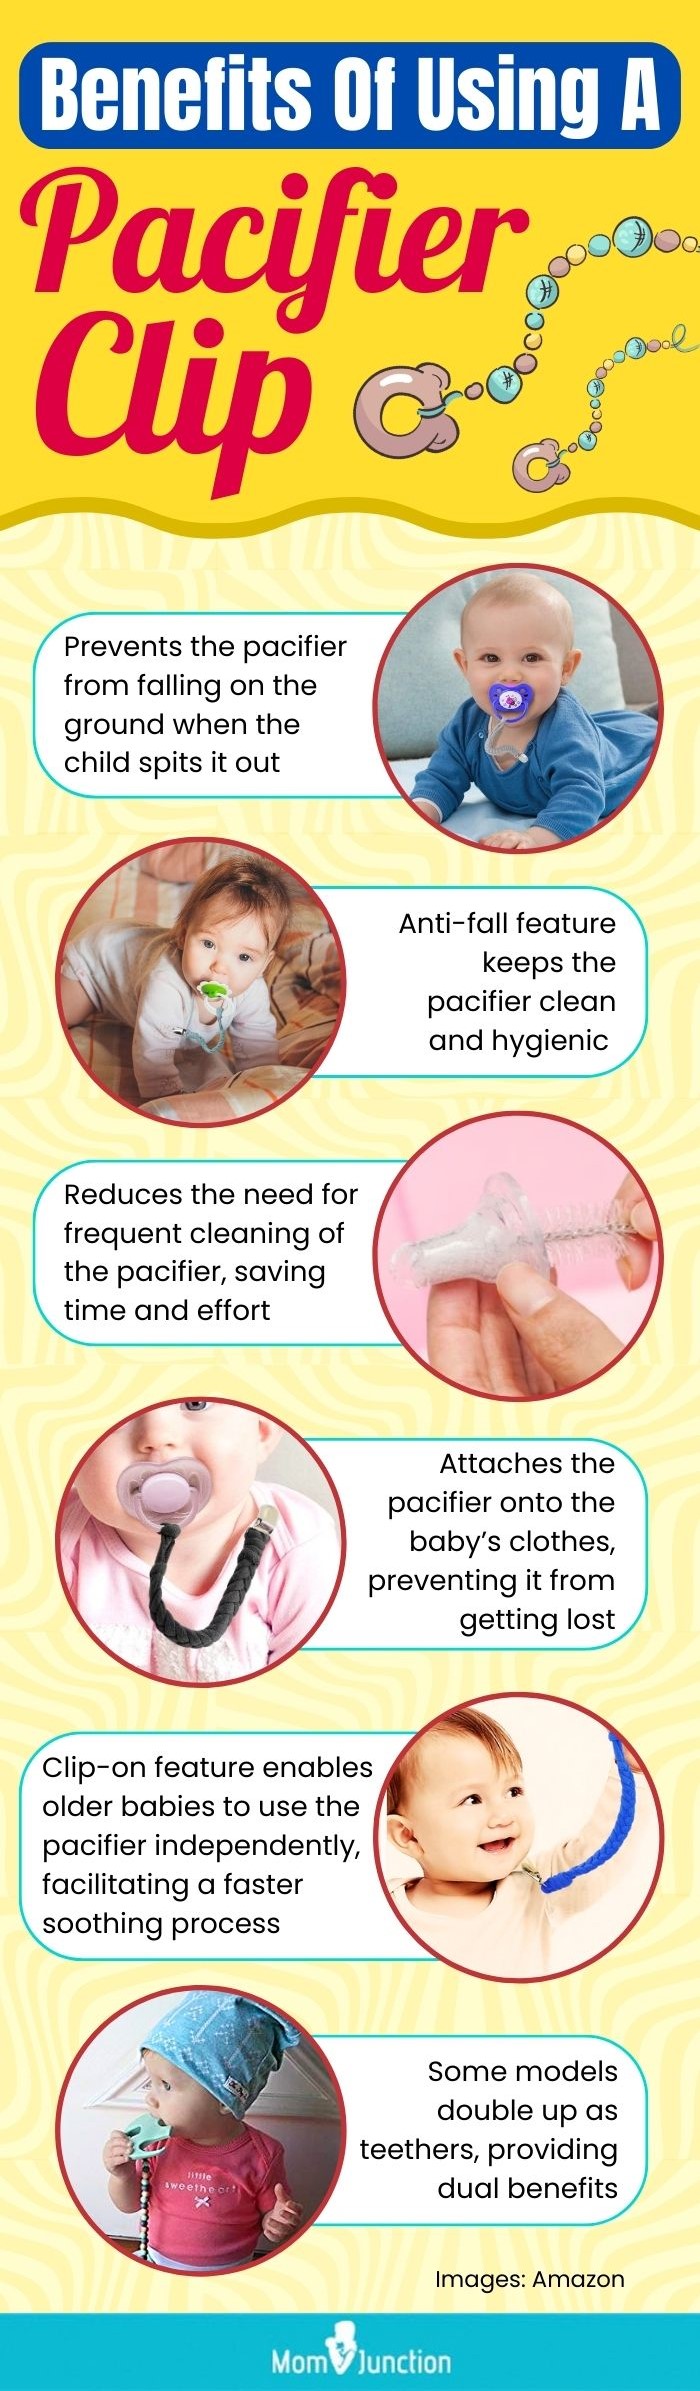 Benefits Of Using A Pacifier Clip (infographic)